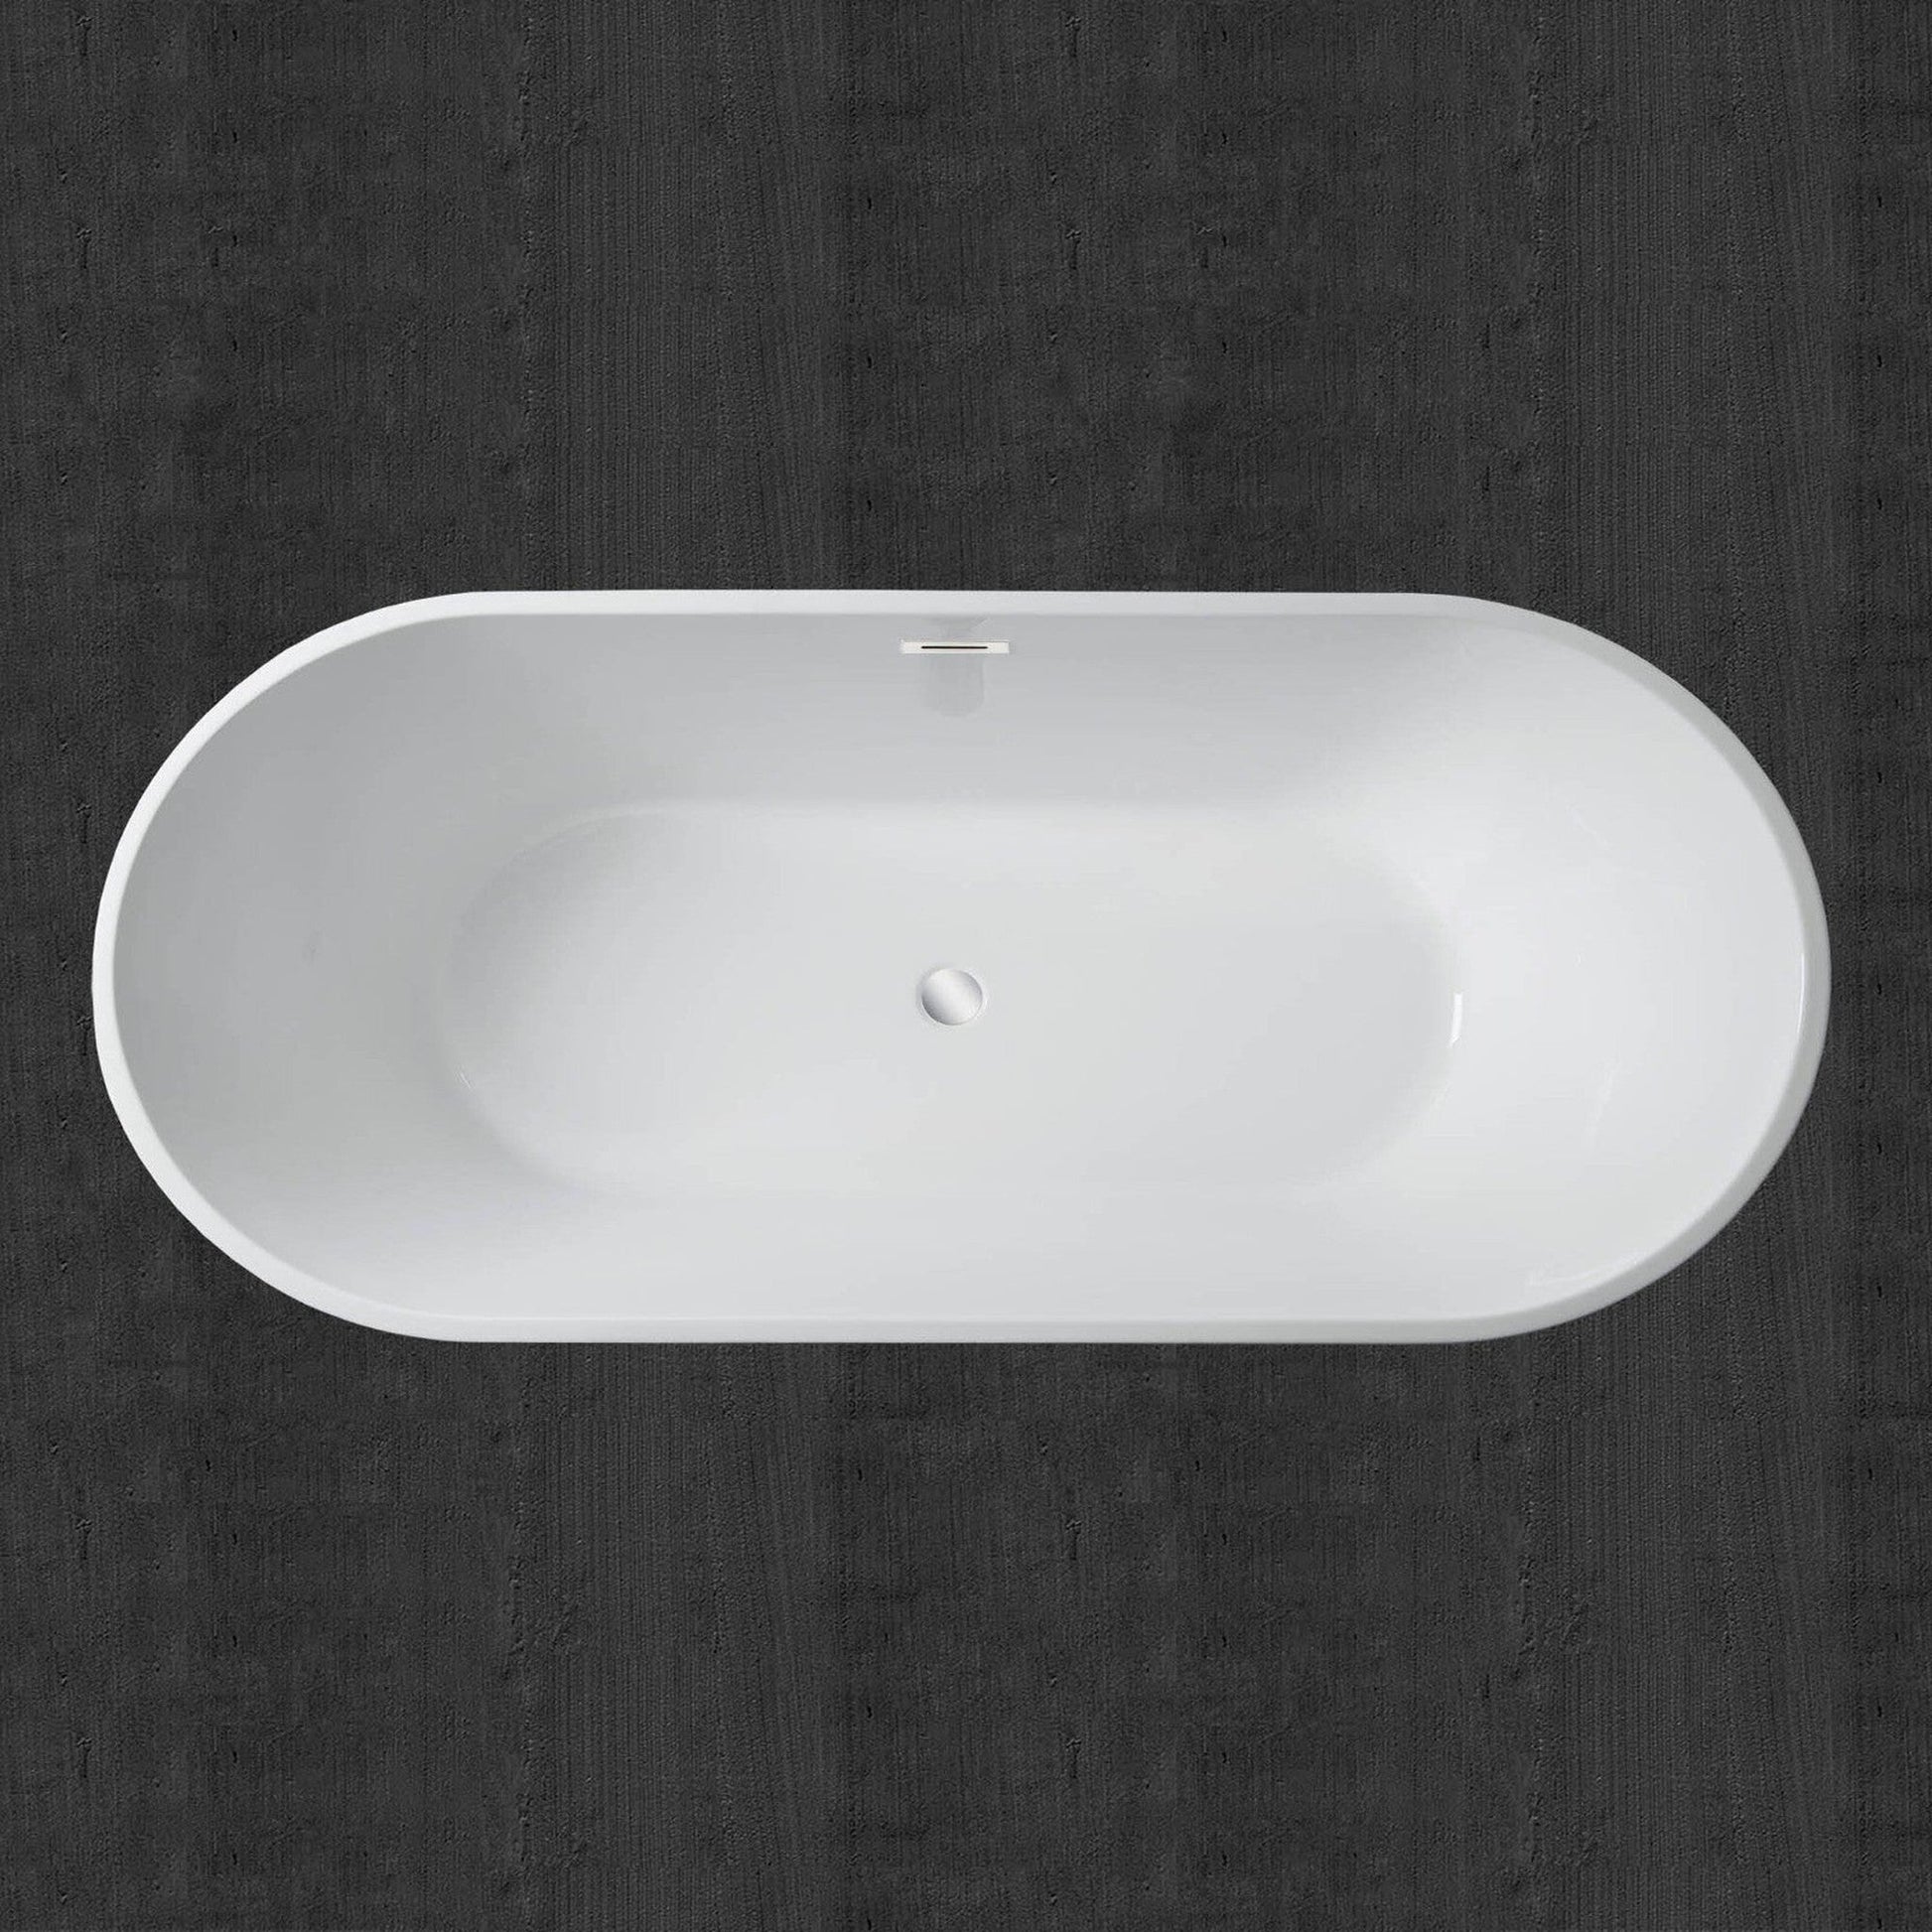 WoodBridge 71" White Acrylic Freestanding Contemporary Soaking Bathtub With Chrome Drain, Overflow, F0002CHSQ Tub Filler and Caddy Tray